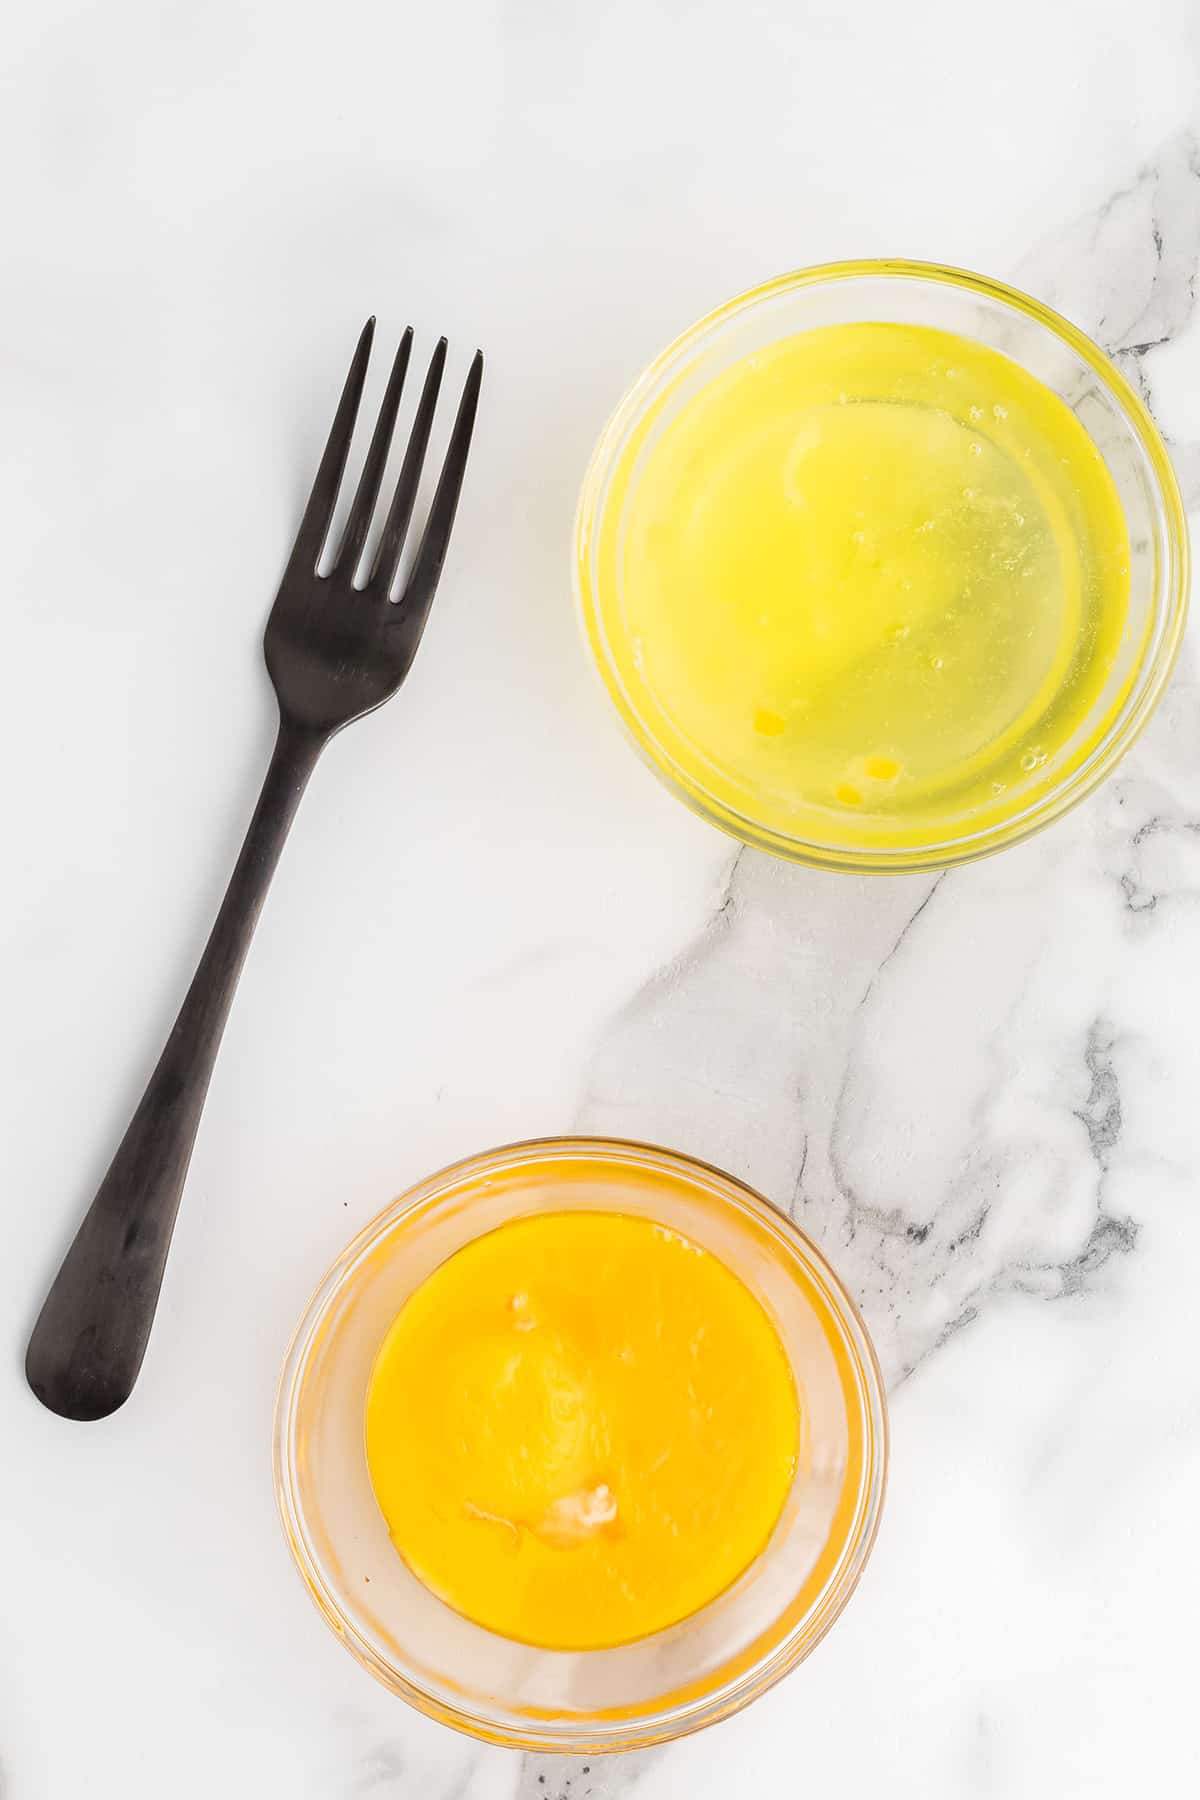 Egg white and yolks in two small bowls.